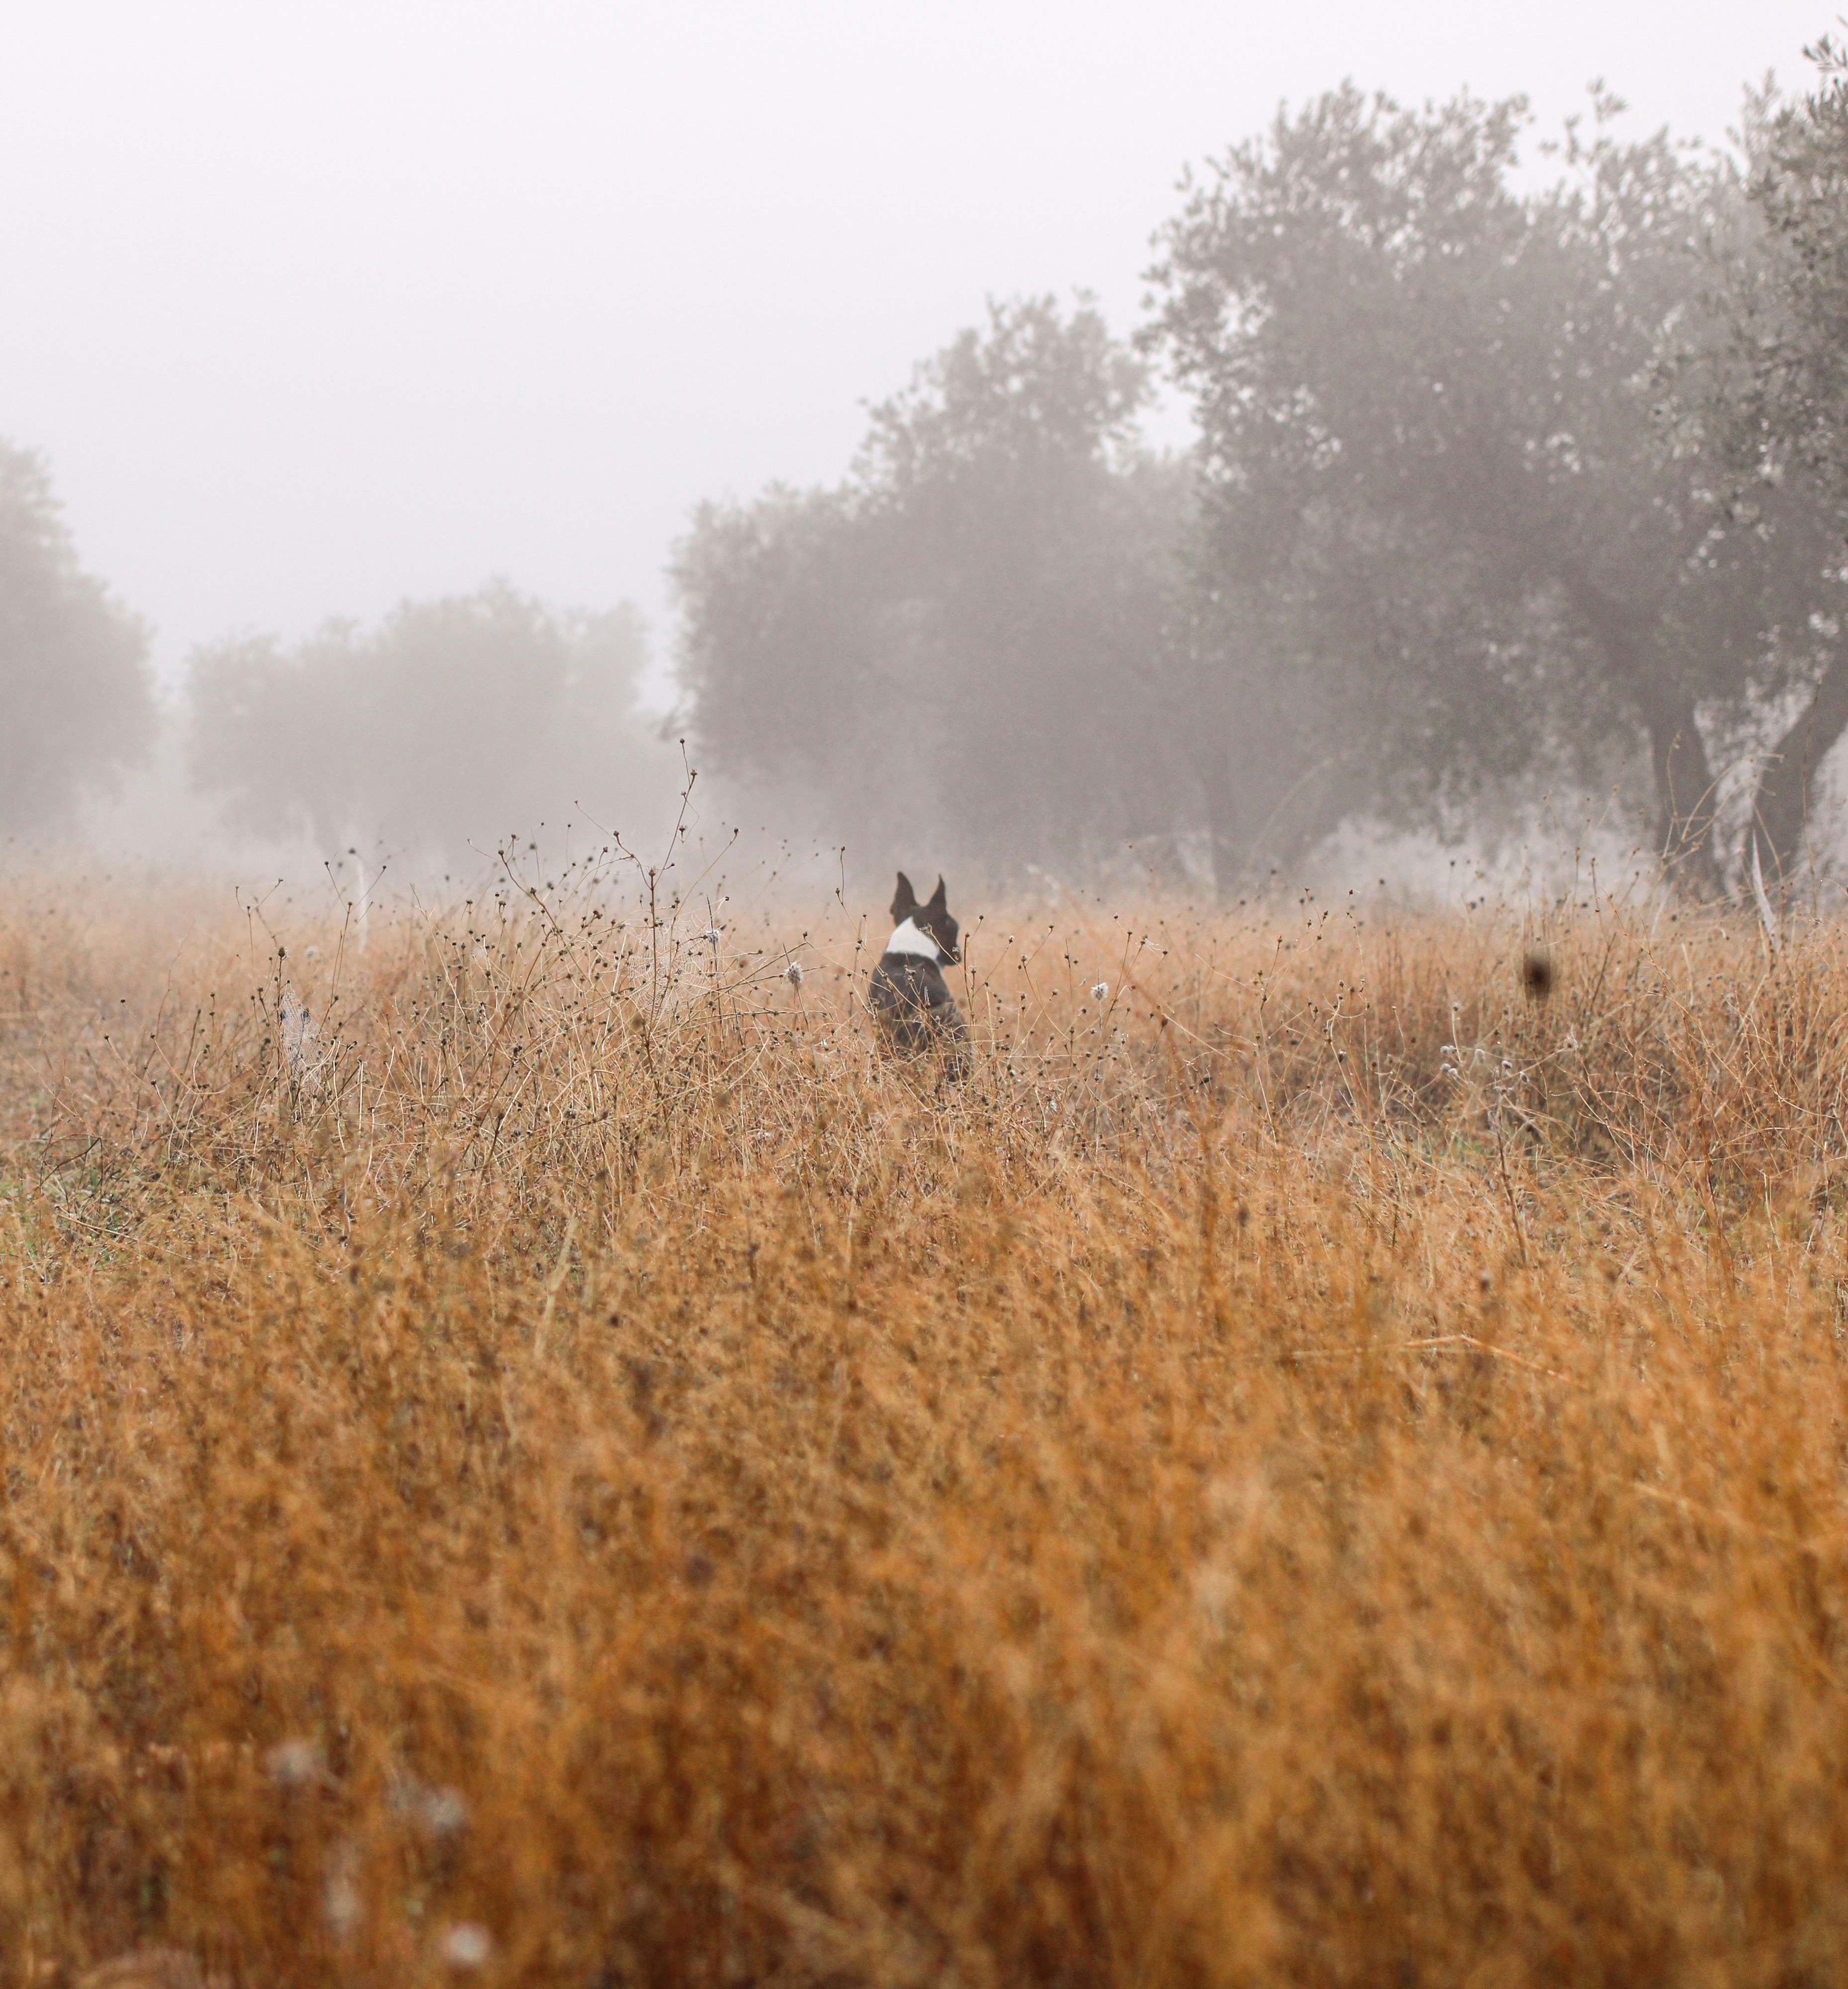 Walks through the fields of Ciudad Real in autumn